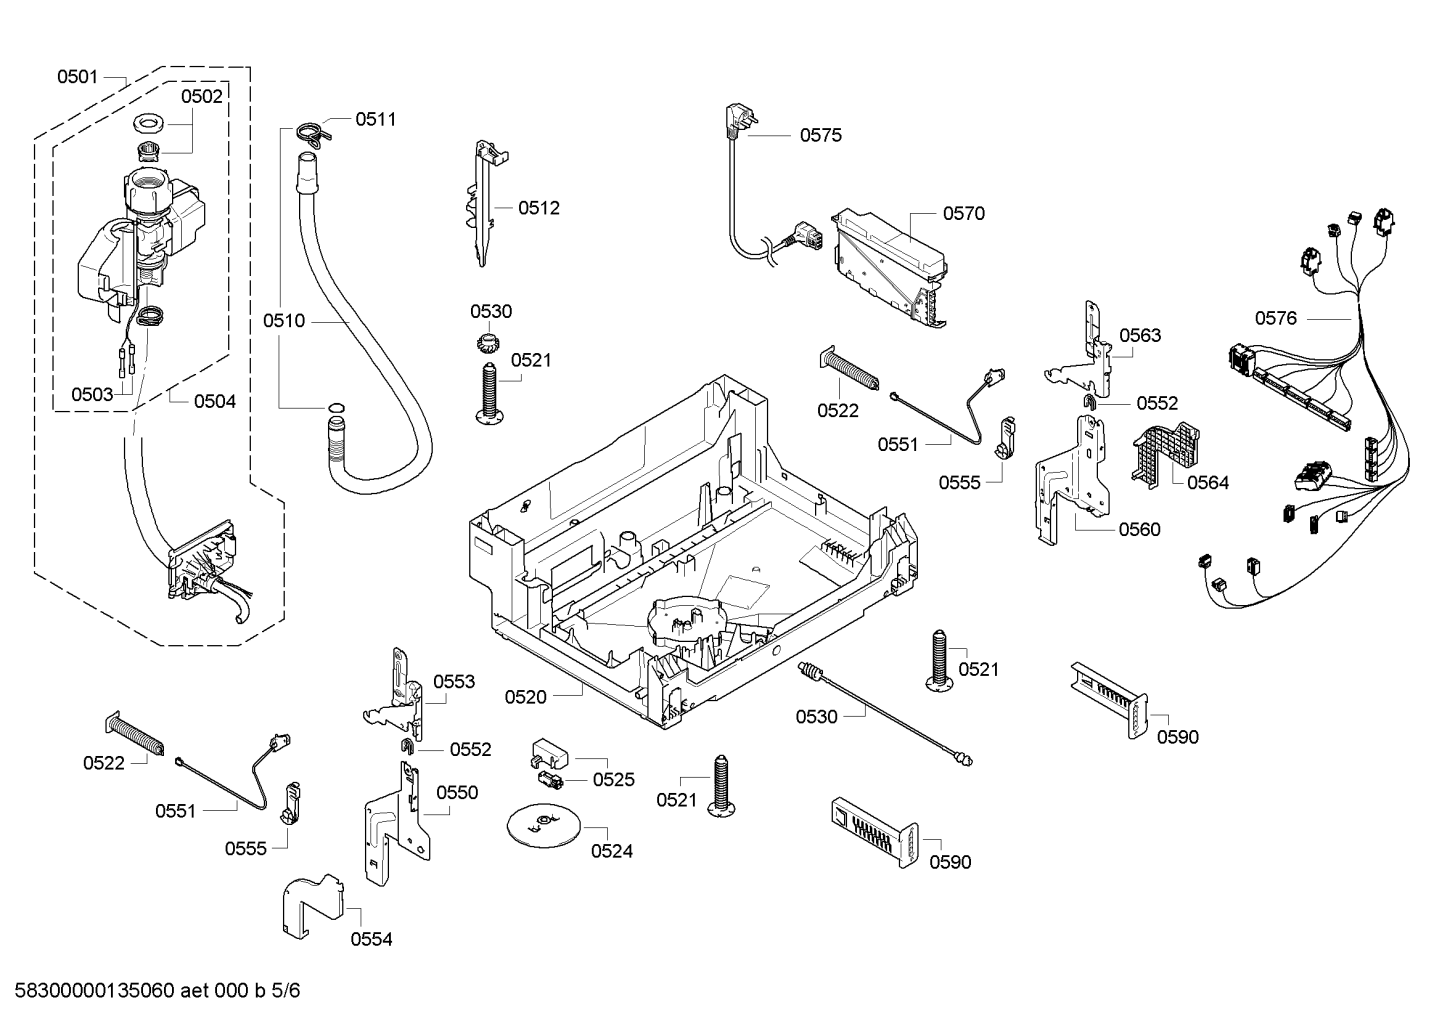 drawing_link_5_device_1594720